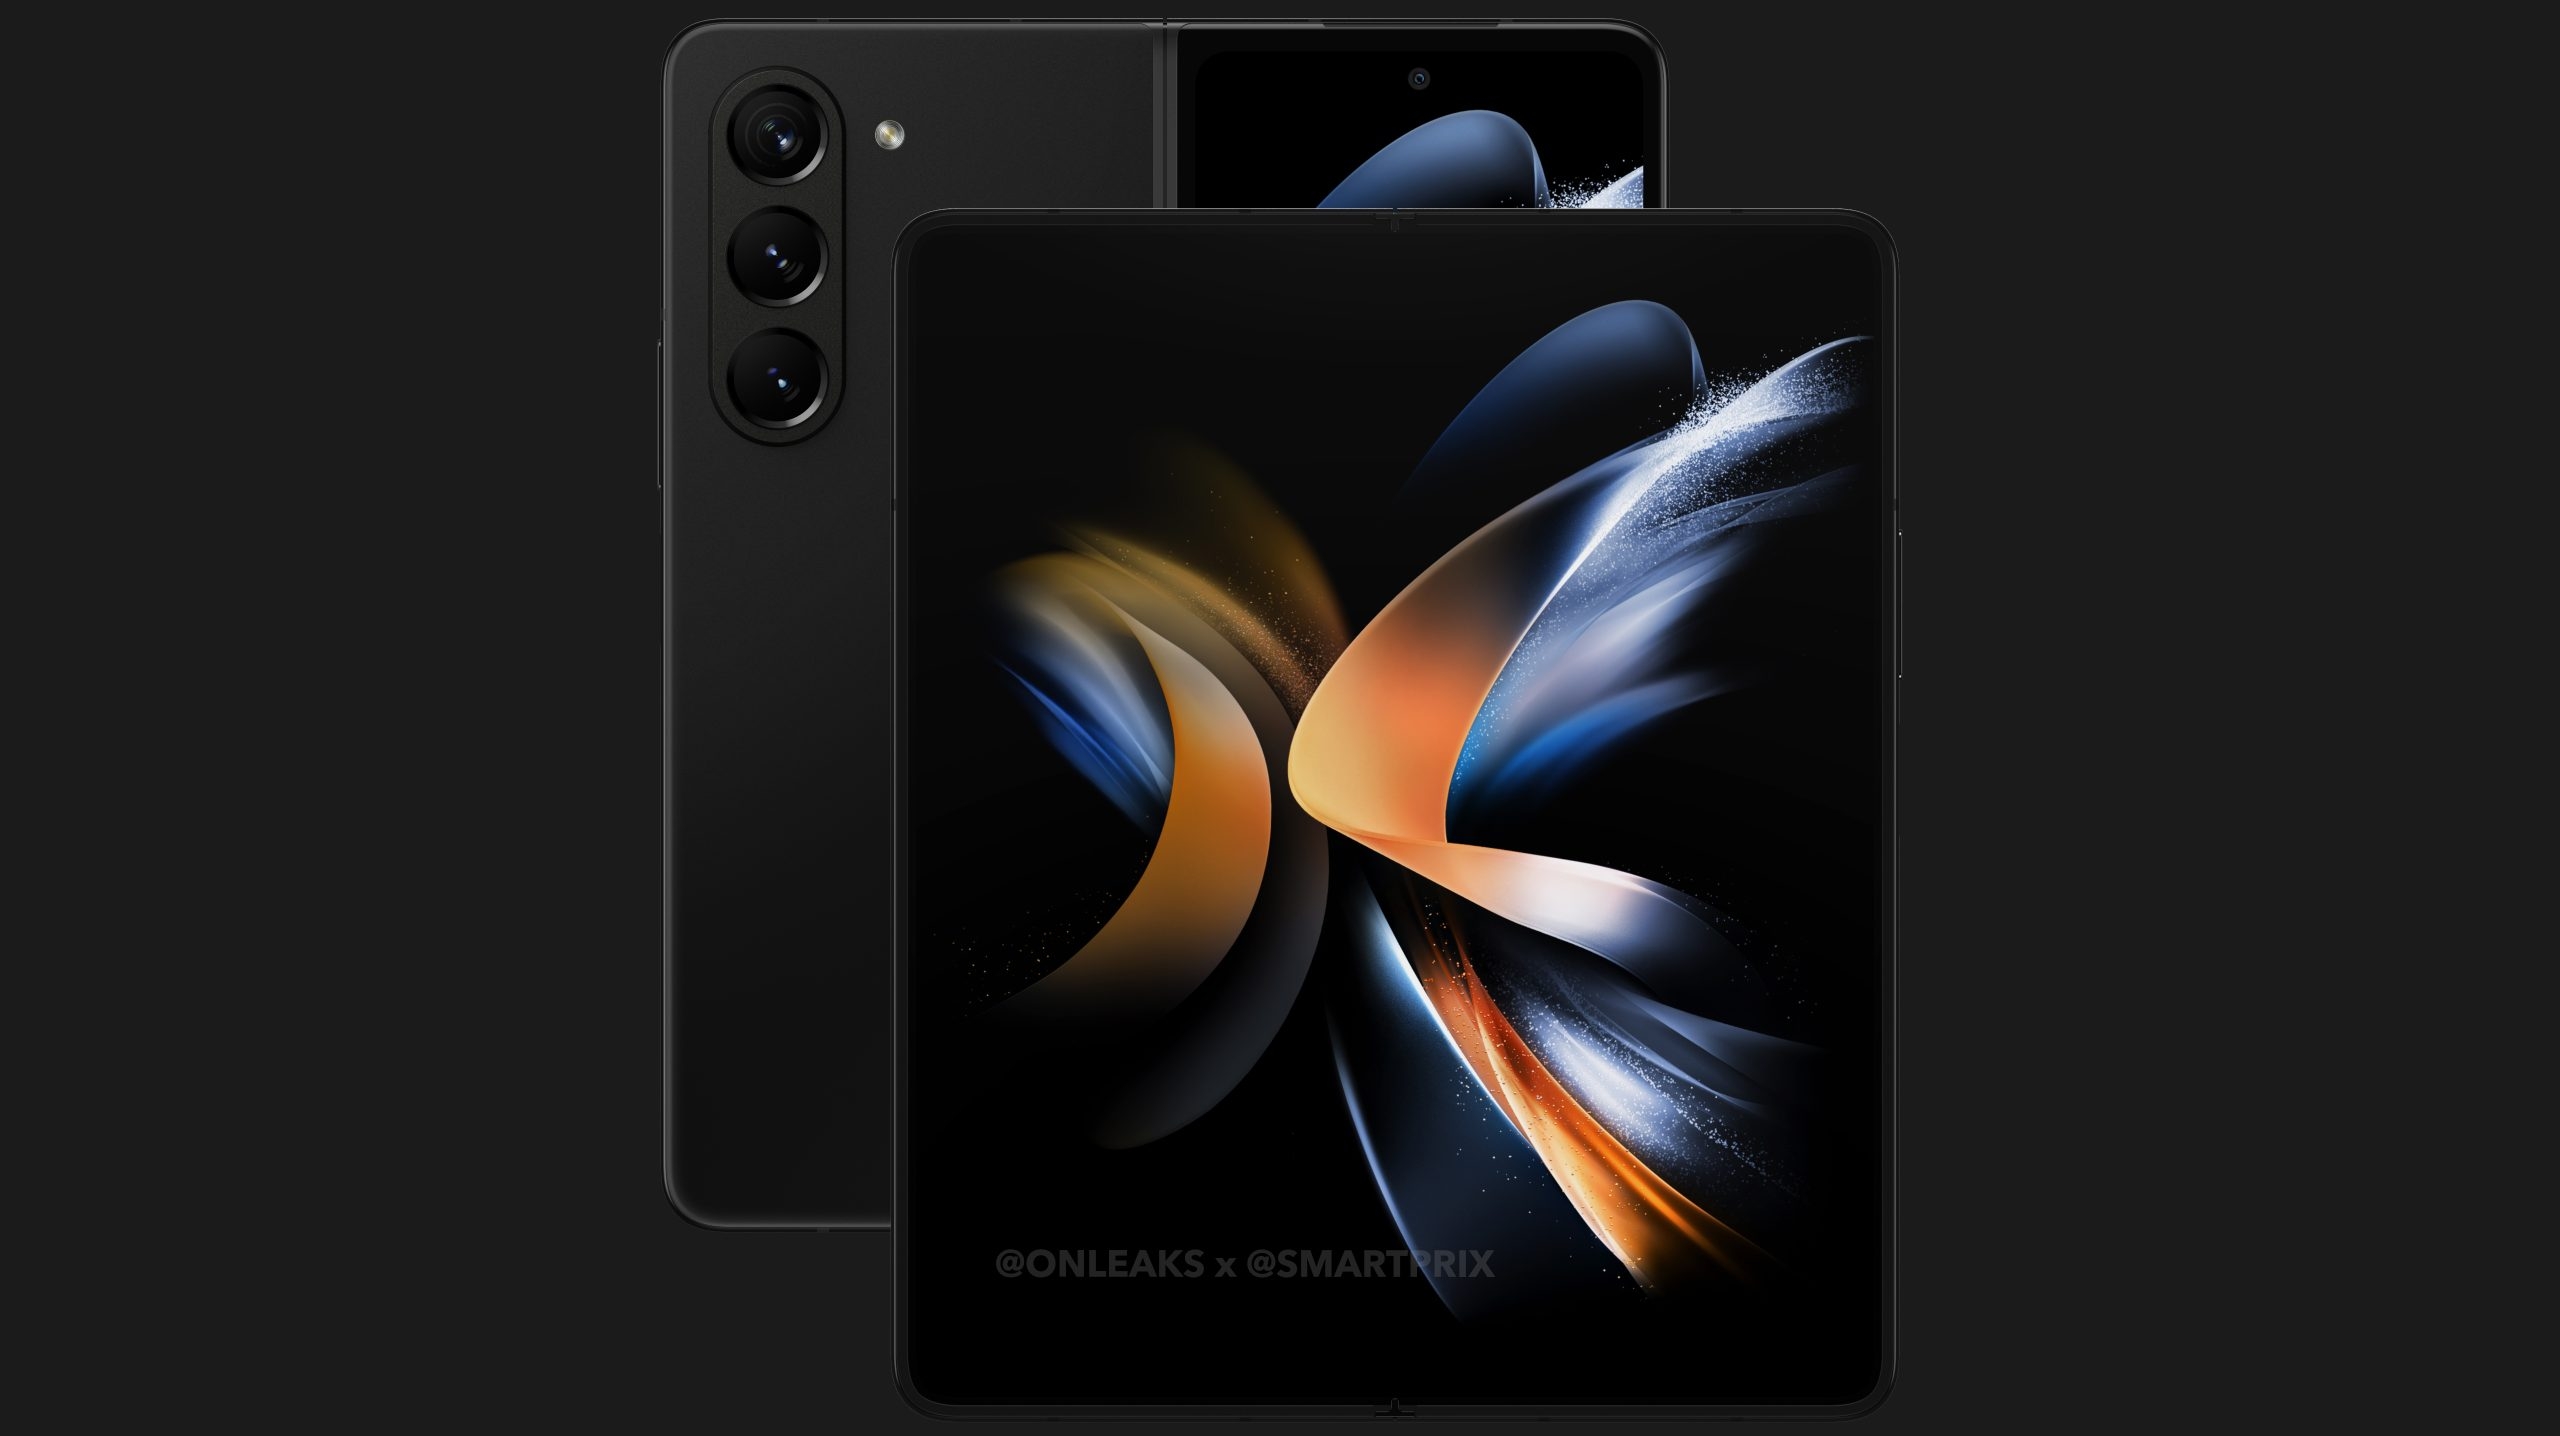 Leaked renders showing the Samsung Galaxy Z Fold 5